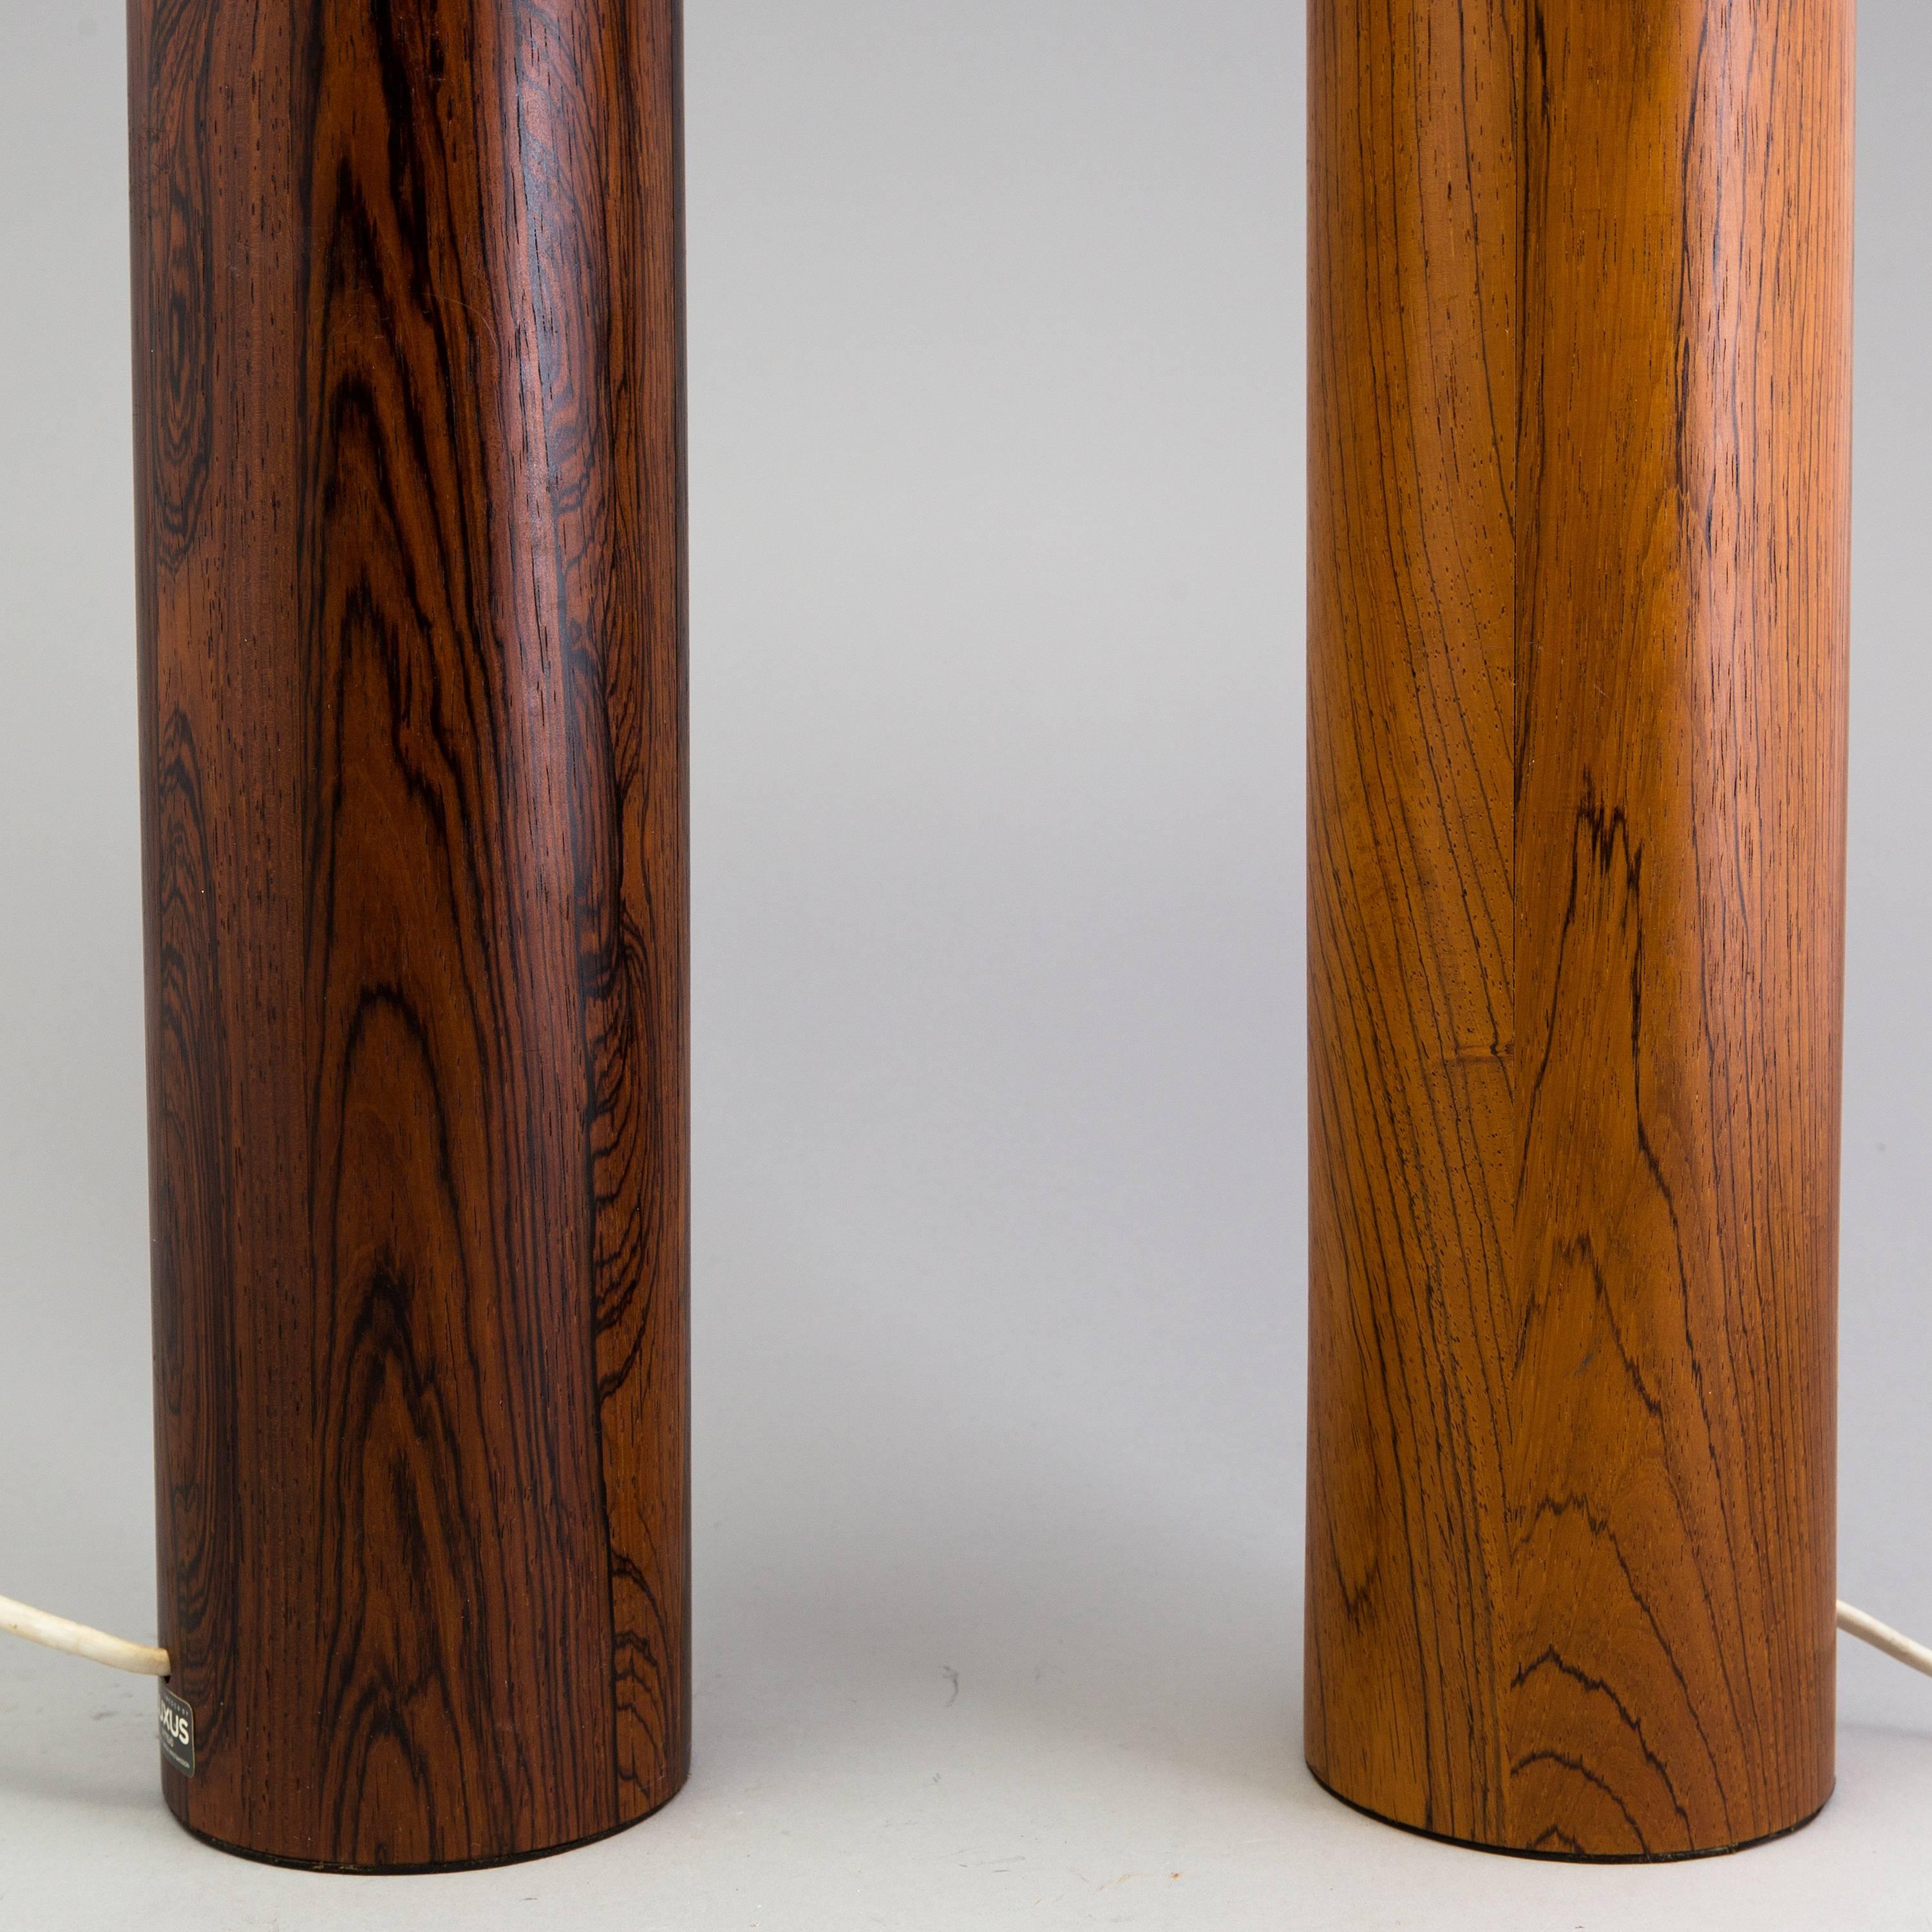 Scandinavian Modern pair of table lamps by Uno & Osten Kristiansson for Luxus, manufactured in Sweden in 1960s. Base in rosewood and acrylic shade. 
Labeled by Luxus.